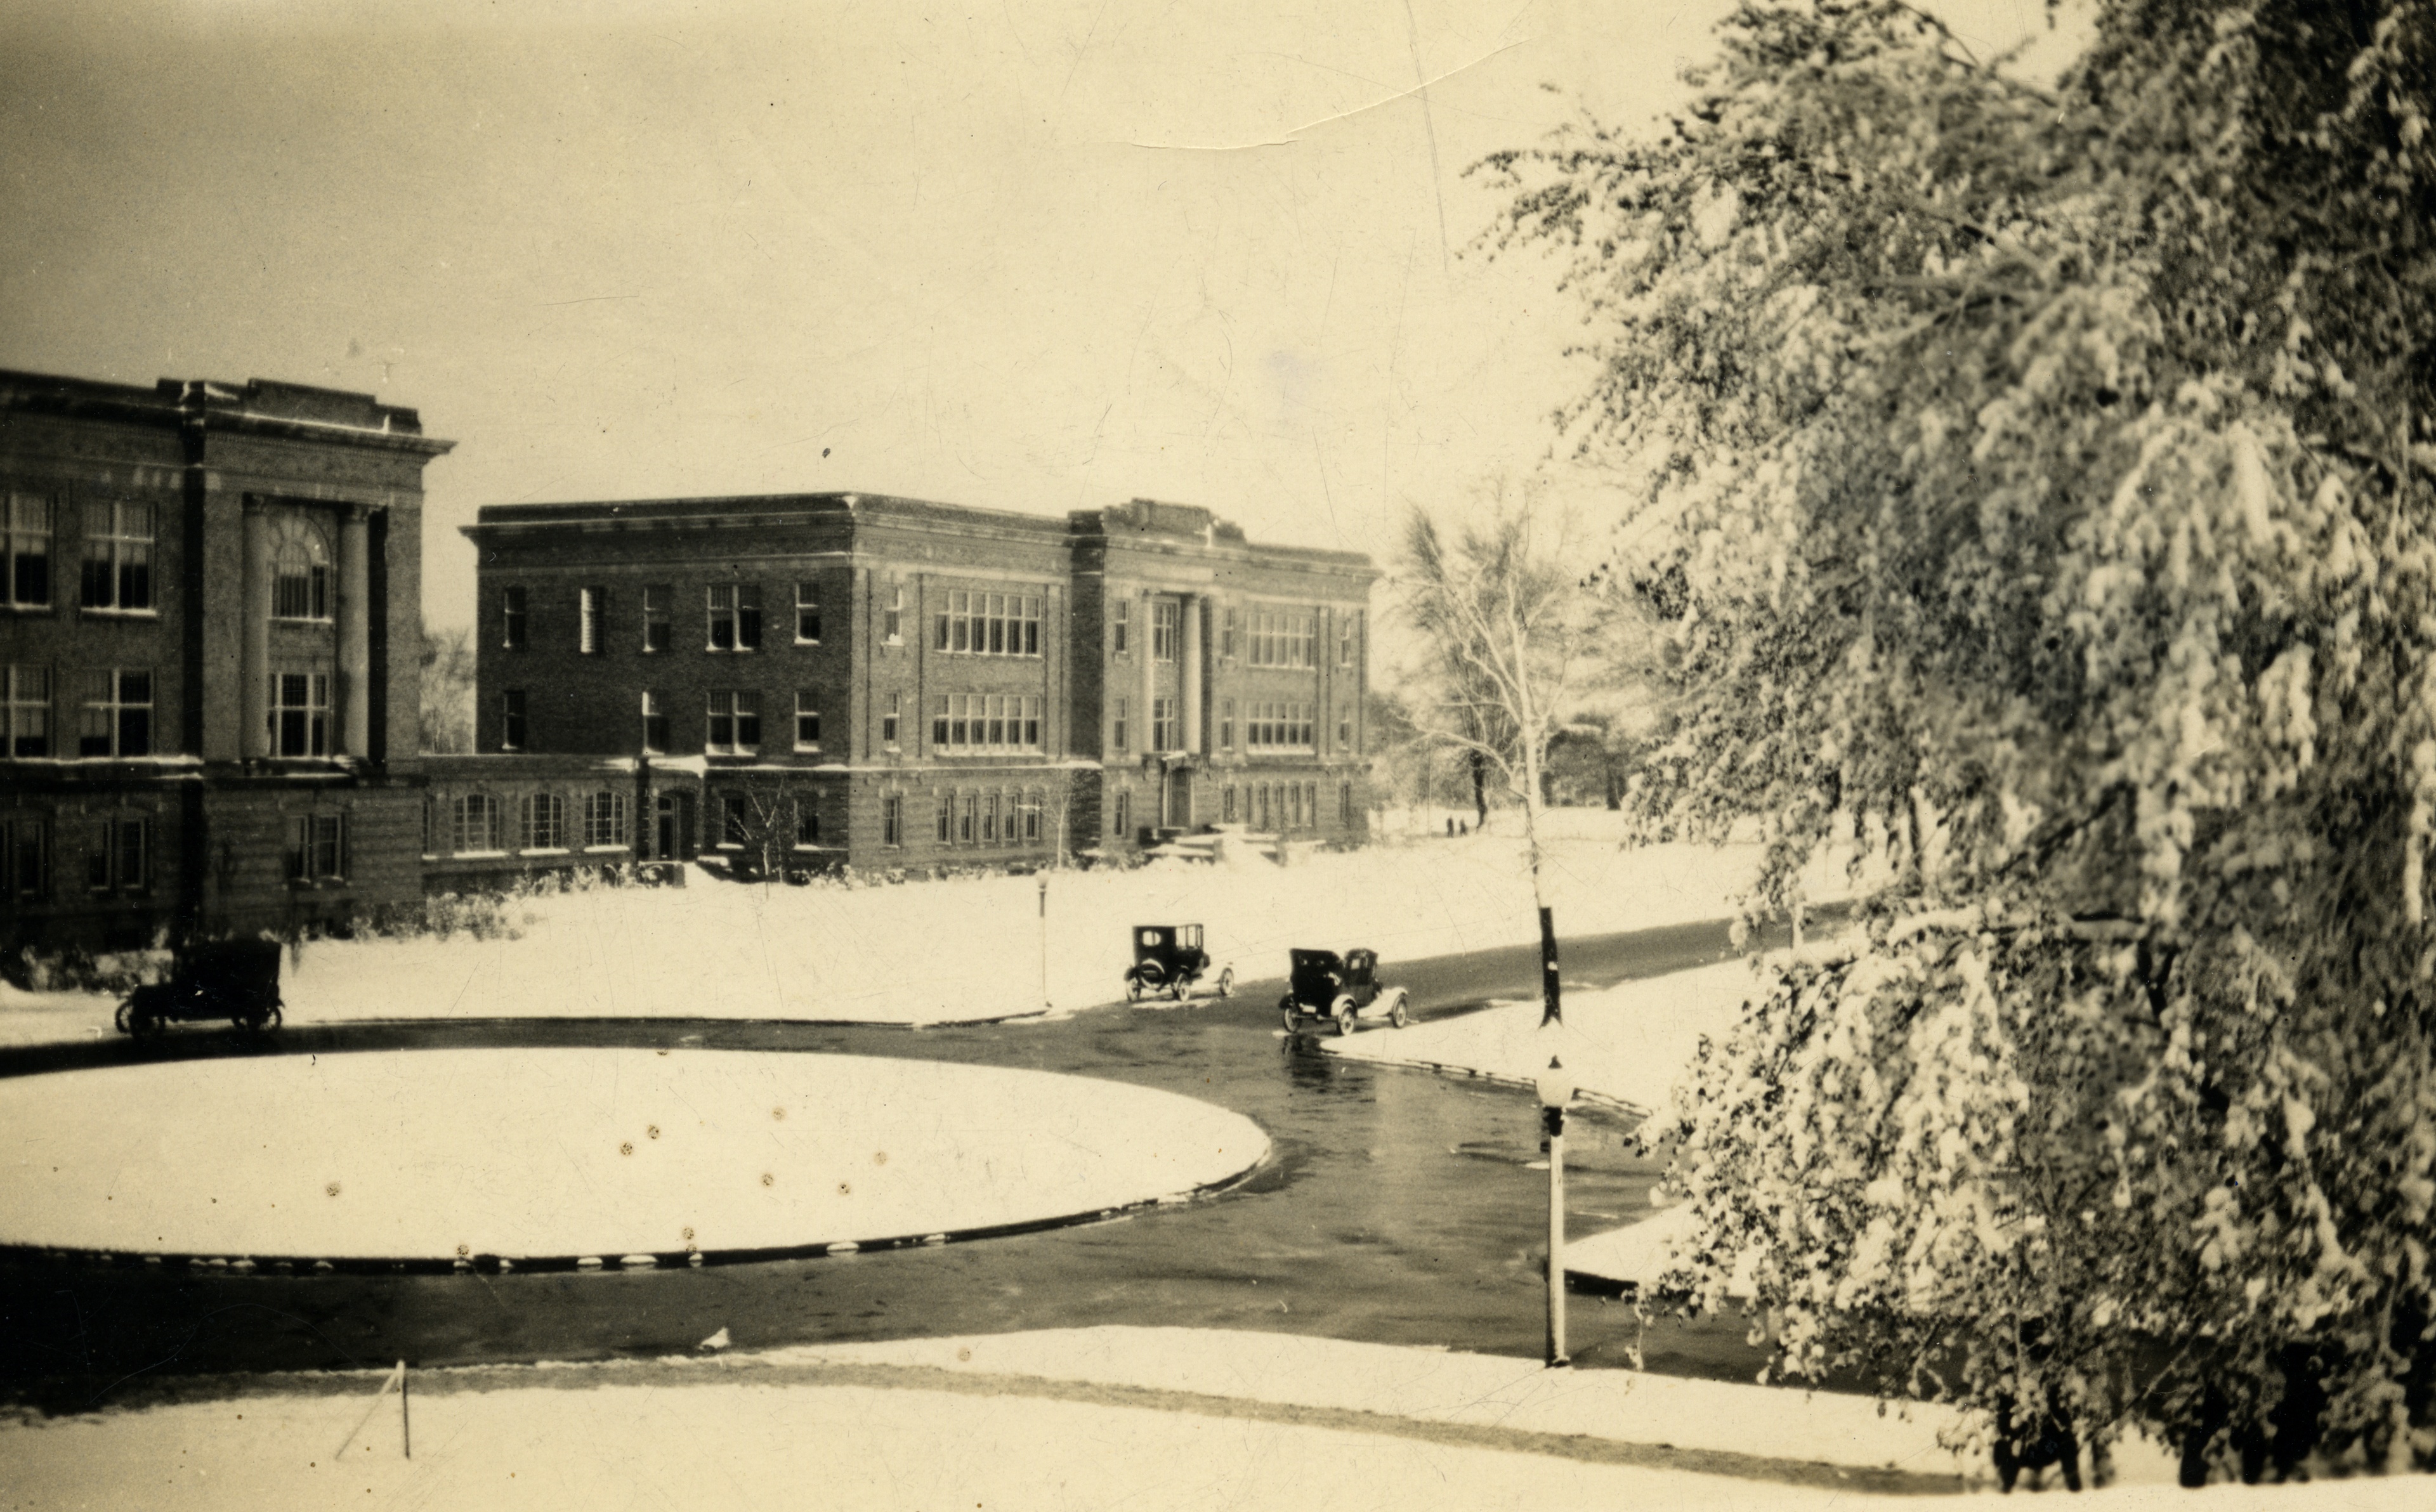 Snowy winters have been a long-time staple of a BGSU experience.